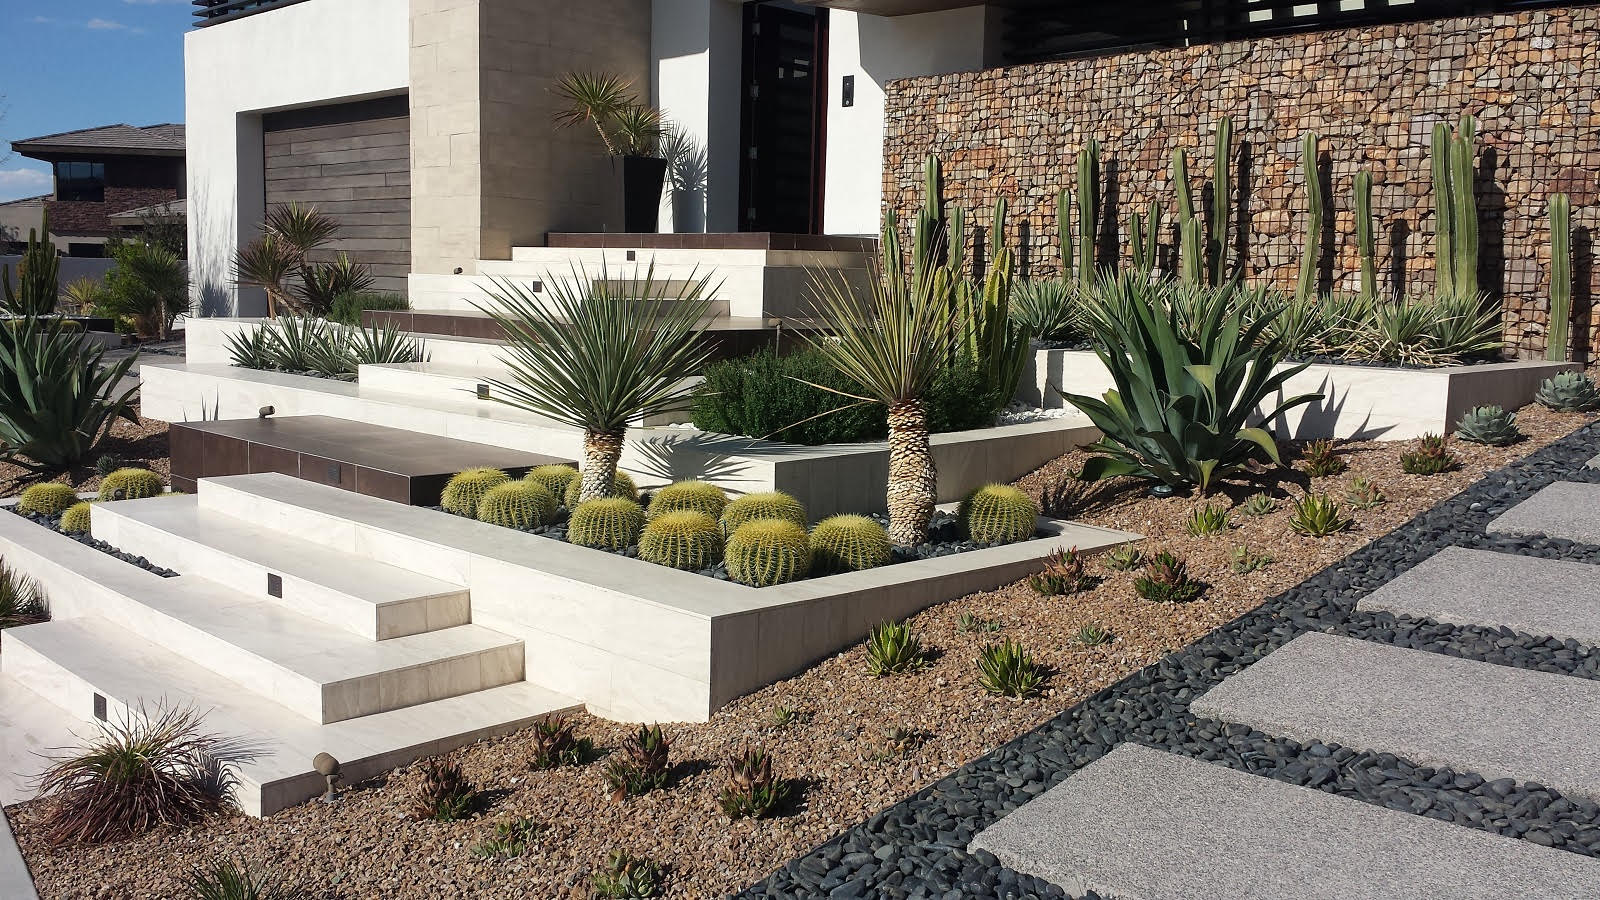 Landscape Architectural Services & Designs By Creative Las Vegas Landscape Architect Jonathan Spears, a licensed landscape architect in Nevada and California.